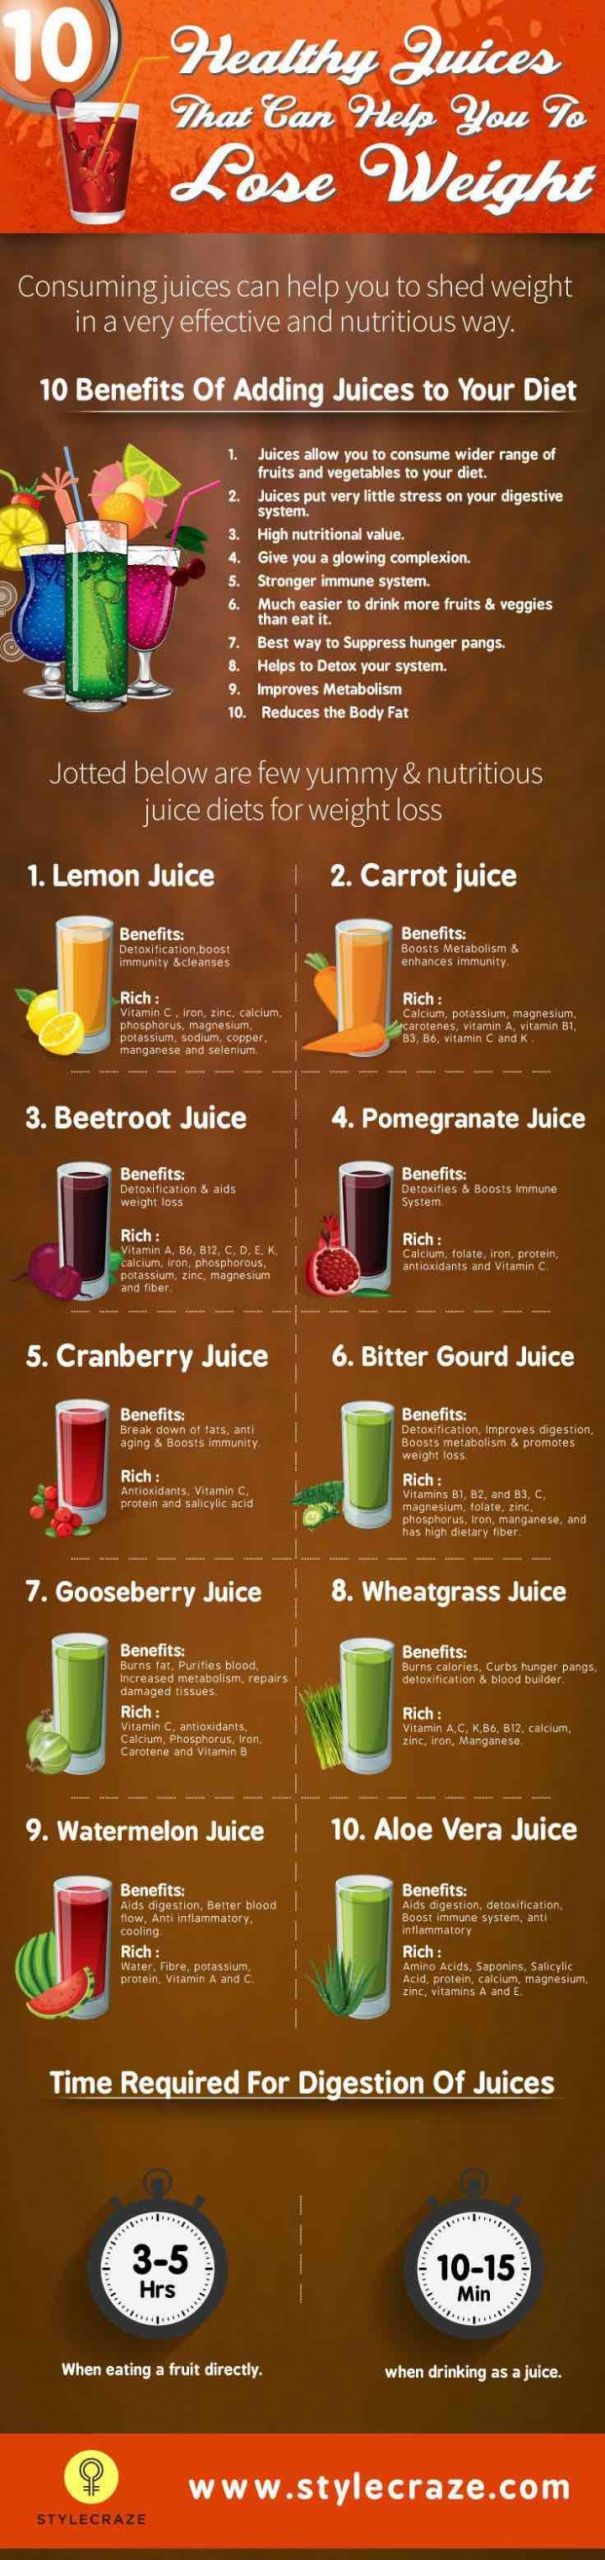 Weight Loss Juice Recipes
 Juicing Recipes for Detoxing and Weight Loss MODwedding